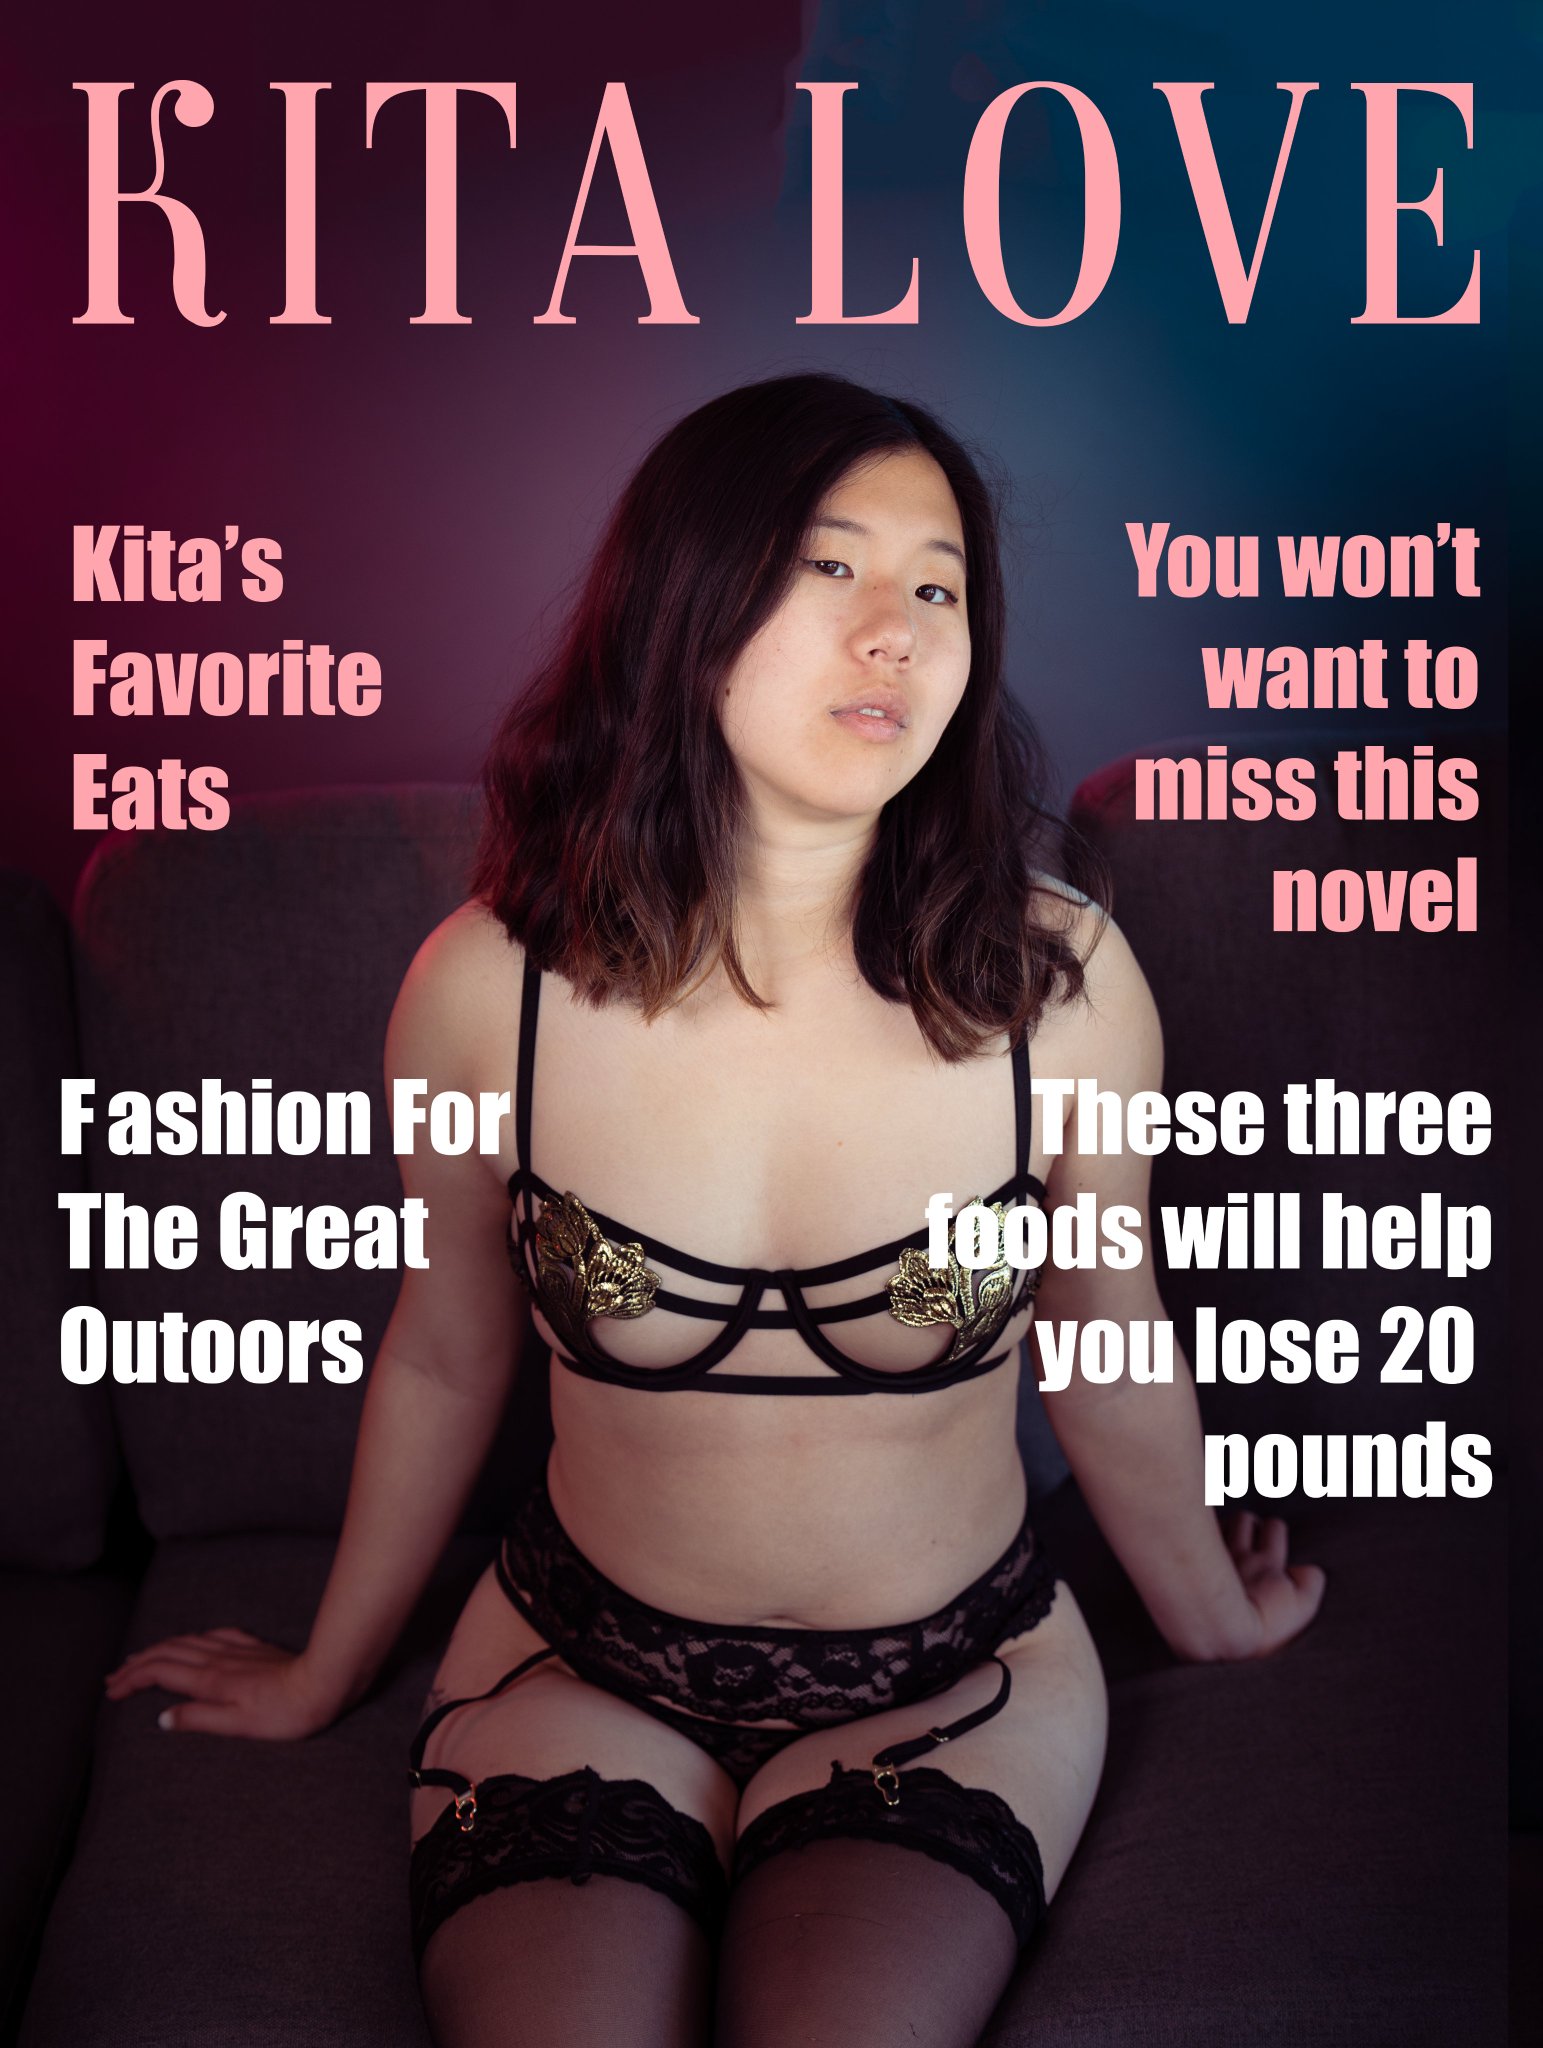 TW Pornstars - Kita Love. Twitter. Finished up a magazine model themed  video coming out tomorrow. 11:06 PM - 29 Nov 2022